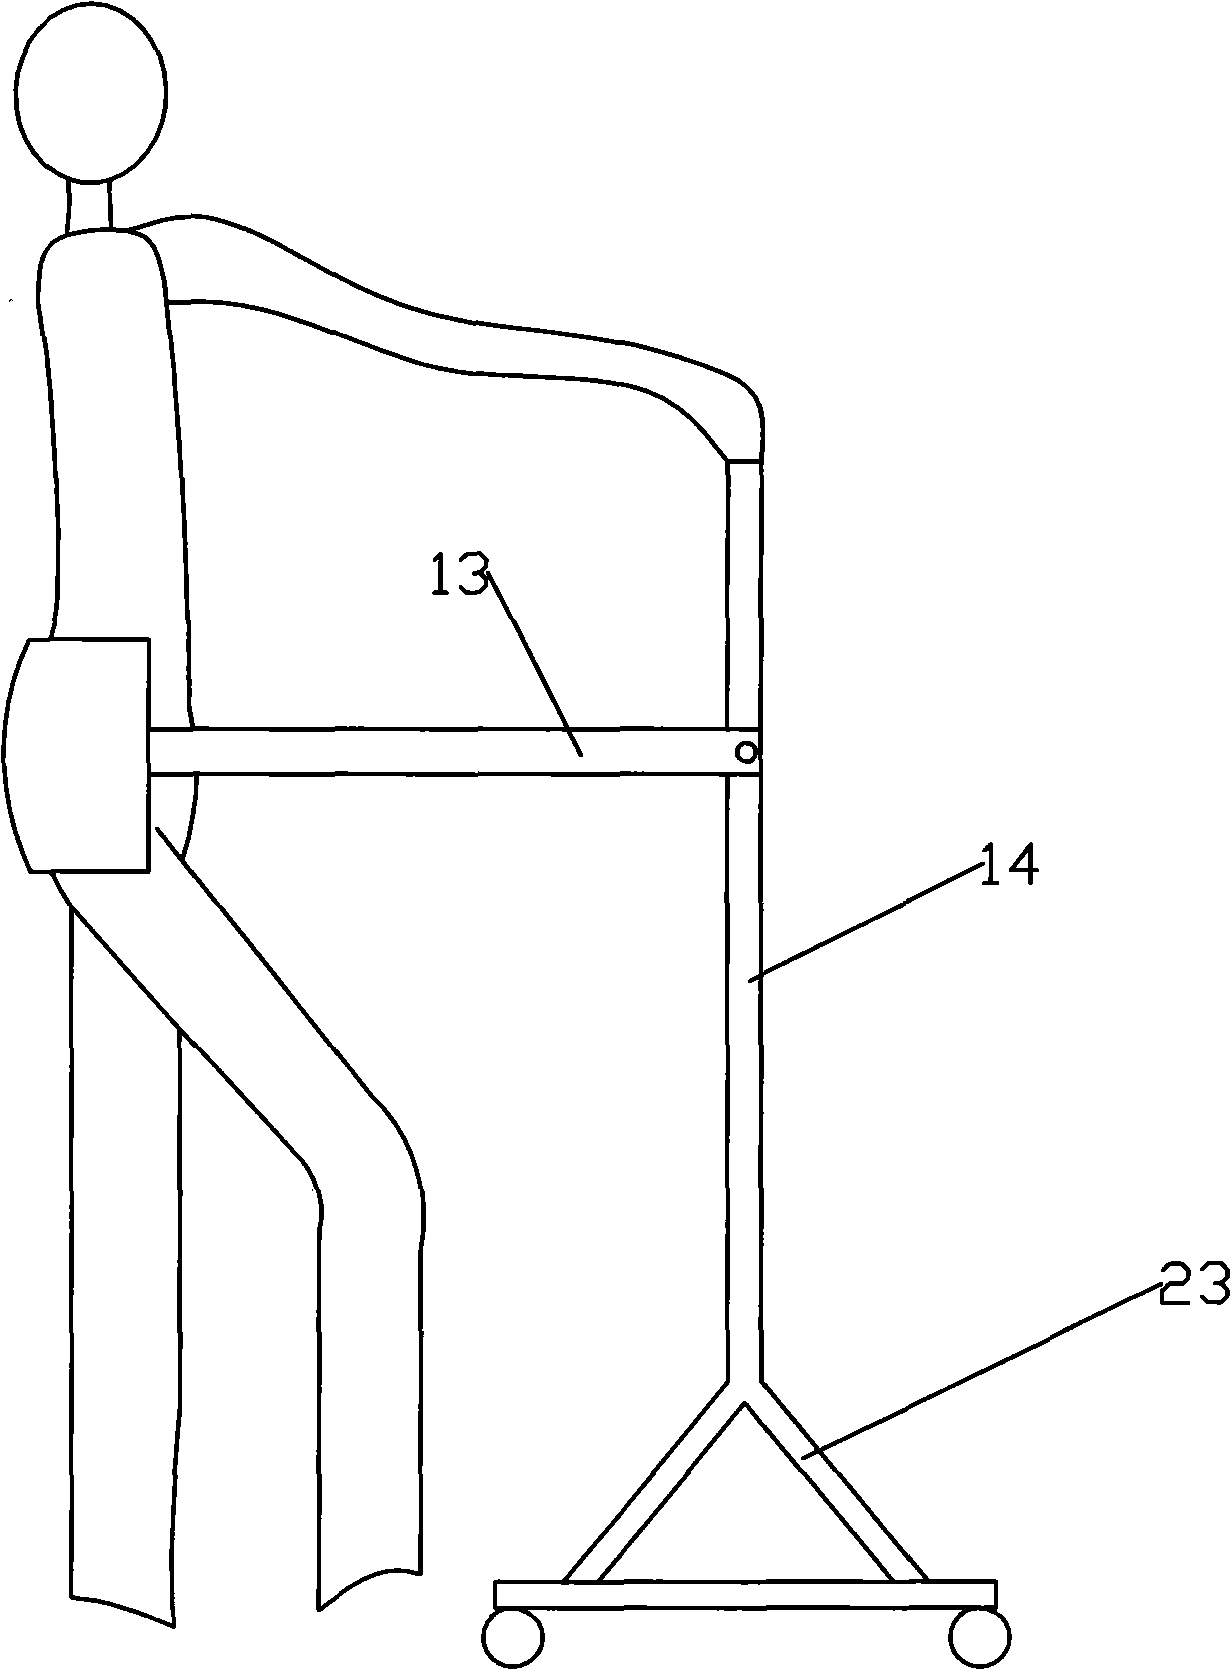 Device for recovery of paralyzed limbs